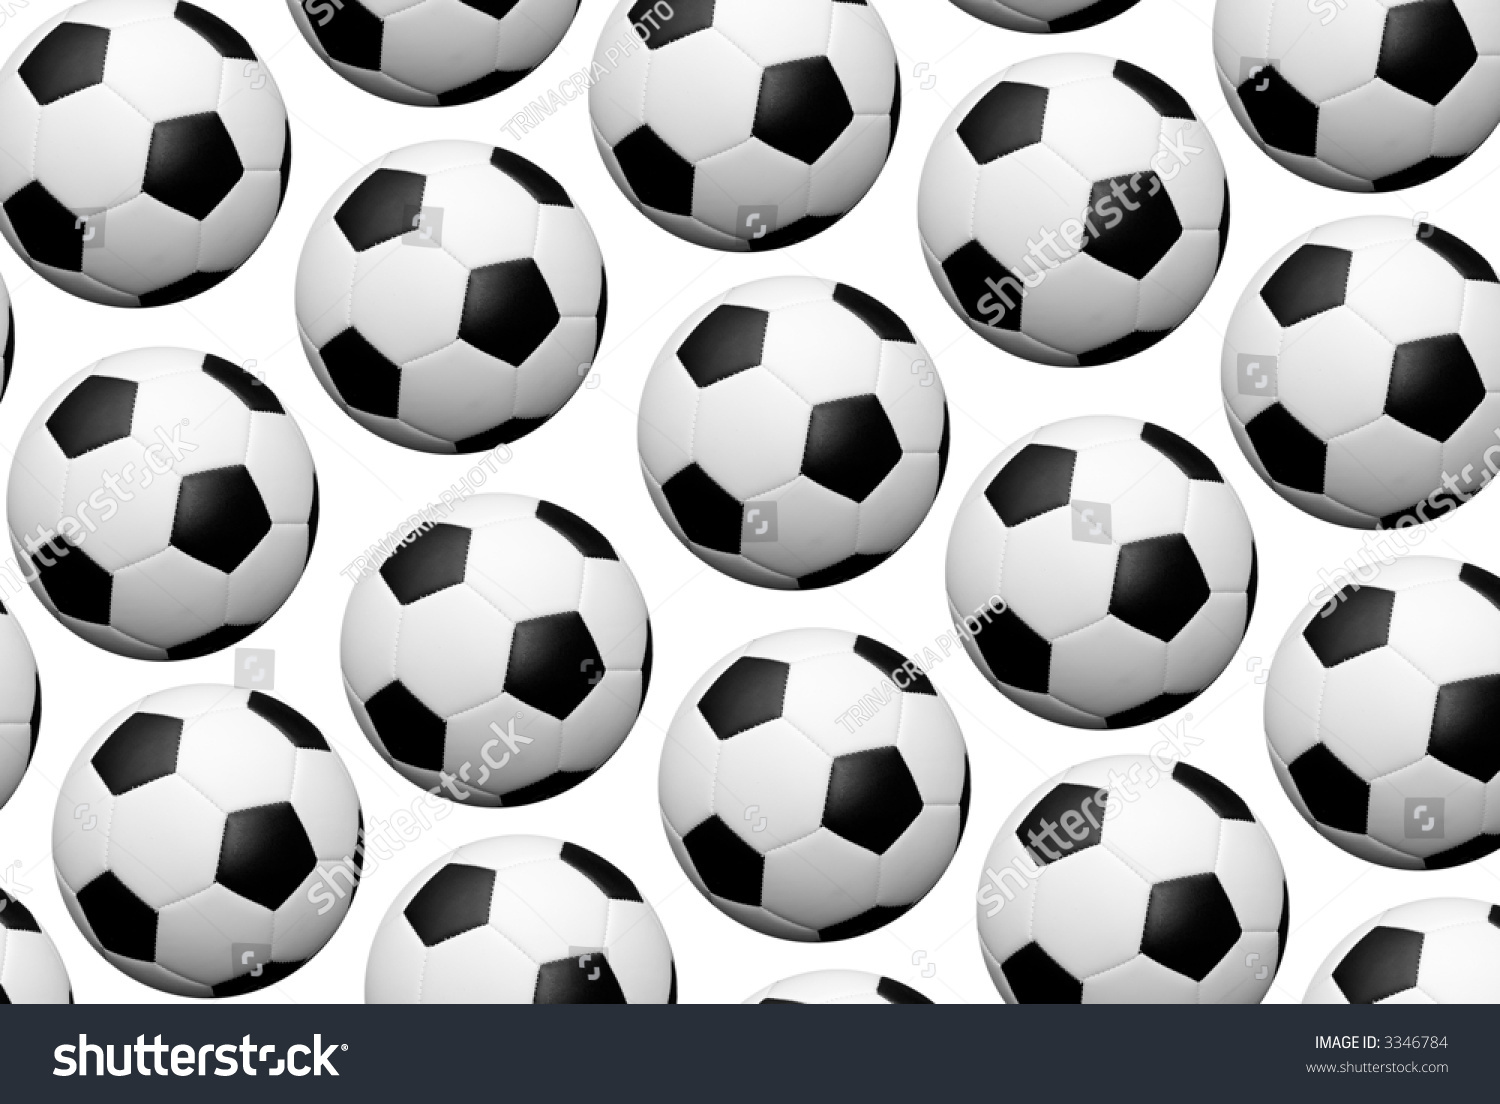 Soccer Ball Background Isolated Over Field Stock Photo 3346784 ...